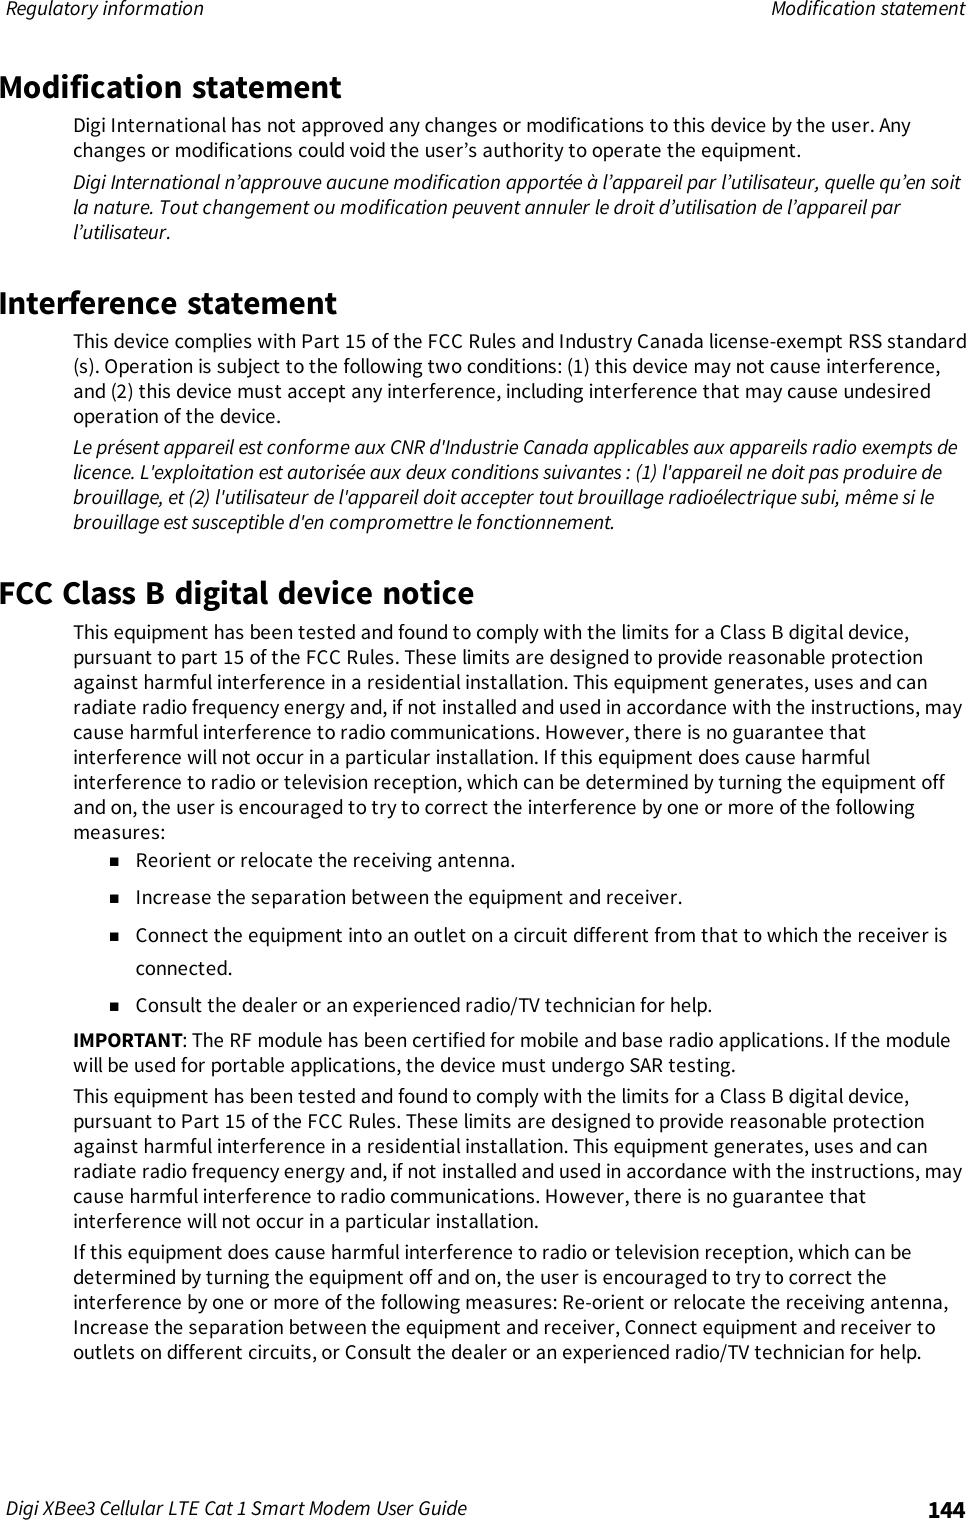 Regulatory information Modification statementDigi XBee3 Cellular LTE Cat 1 Smart Modem User Guide 144Modification statementDigi International has not approved any changes or modifications to this device by the user. Anychanges or modifications could void the user’s authority to operate the equipment.Digi International n’approuve aucune modification apportée à l’appareil par l’utilisateur, quelle qu’en soitla nature. Tout changement ou modification peuvent annuler le droit d’utilisation de l’appareil parl’utilisateur.Interference statementThis device complies with Part 15 of the FCC Rules and Industry Canada license-exempt RSS standard(s). Operation is subject to the following two conditions: (1) this device may not cause interference,and (2) this device must accept any interference, including interference that may cause undesiredoperation of the device.Le présent appareil est conforme aux CNR d&apos;Industrie Canada applicables aux appareils radio exempts delicence. L&apos;exploitation est autorisée aux deux conditions suivantes : (1) l&apos;appareil ne doit pas produire debrouillage, et (2) l&apos;utilisateur de l&apos;appareil doit accepter tout brouillage radioélectrique subi, même si lebrouillage est susceptible d&apos;en compromettre le fonctionnement.FCC Class B digital device noticeThis equipment has been tested and found to comply with the limits for a Class B digital device,pursuant to part 15 of the FCC Rules. These limits are designed to provide reasonable protectionagainst harmful interference in a residential installation. This equipment generates, uses and canradiate radio frequency energy and, if not installed and used in accordance with the instructions, maycause harmful interference to radio communications. However, there is no guarantee thatinterference will not occur in a particular installation. If this equipment does cause harmfulinterference to radio or television reception, which can be determined by turning the equipment offand on, the user is encouraged to try to correct the interference by one or more of the followingmeasures:nReorient or relocate the receiving antenna.nIncrease the separation between the equipment and receiver.nConnect the equipment into an outlet on a circuit different from that to which the receiver isconnected.nConsult the dealer or an experienced radio/TV technician for help.IMPORTANT: The RF module has been certified for mobile and base radio applications. If the modulewill be used for portable applications, the device must undergo SAR testing.This equipment has been tested and found to comply with the limits for a Class B digital device,pursuant to Part 15 of the FCC Rules. These limits are designed to provide reasonable protectionagainst harmful interference in a residential installation. This equipment generates, uses and canradiate radio frequency energy and, if not installed and used in accordance with the instructions, maycause harmful interference to radio communications. However, there is no guarantee thatinterference will not occur in a particular installation.If this equipment does cause harmful interference to radio or television reception, which can bedetermined by turning the equipment off and on, the user is encouraged to try to correct theinterference by one or more of the following measures: Re-orient or relocate the receiving antenna,Increase the separation between the equipment and receiver, Connect equipment and receiver tooutlets on different circuits, or Consult the dealer or an experienced radio/TV technician for help.